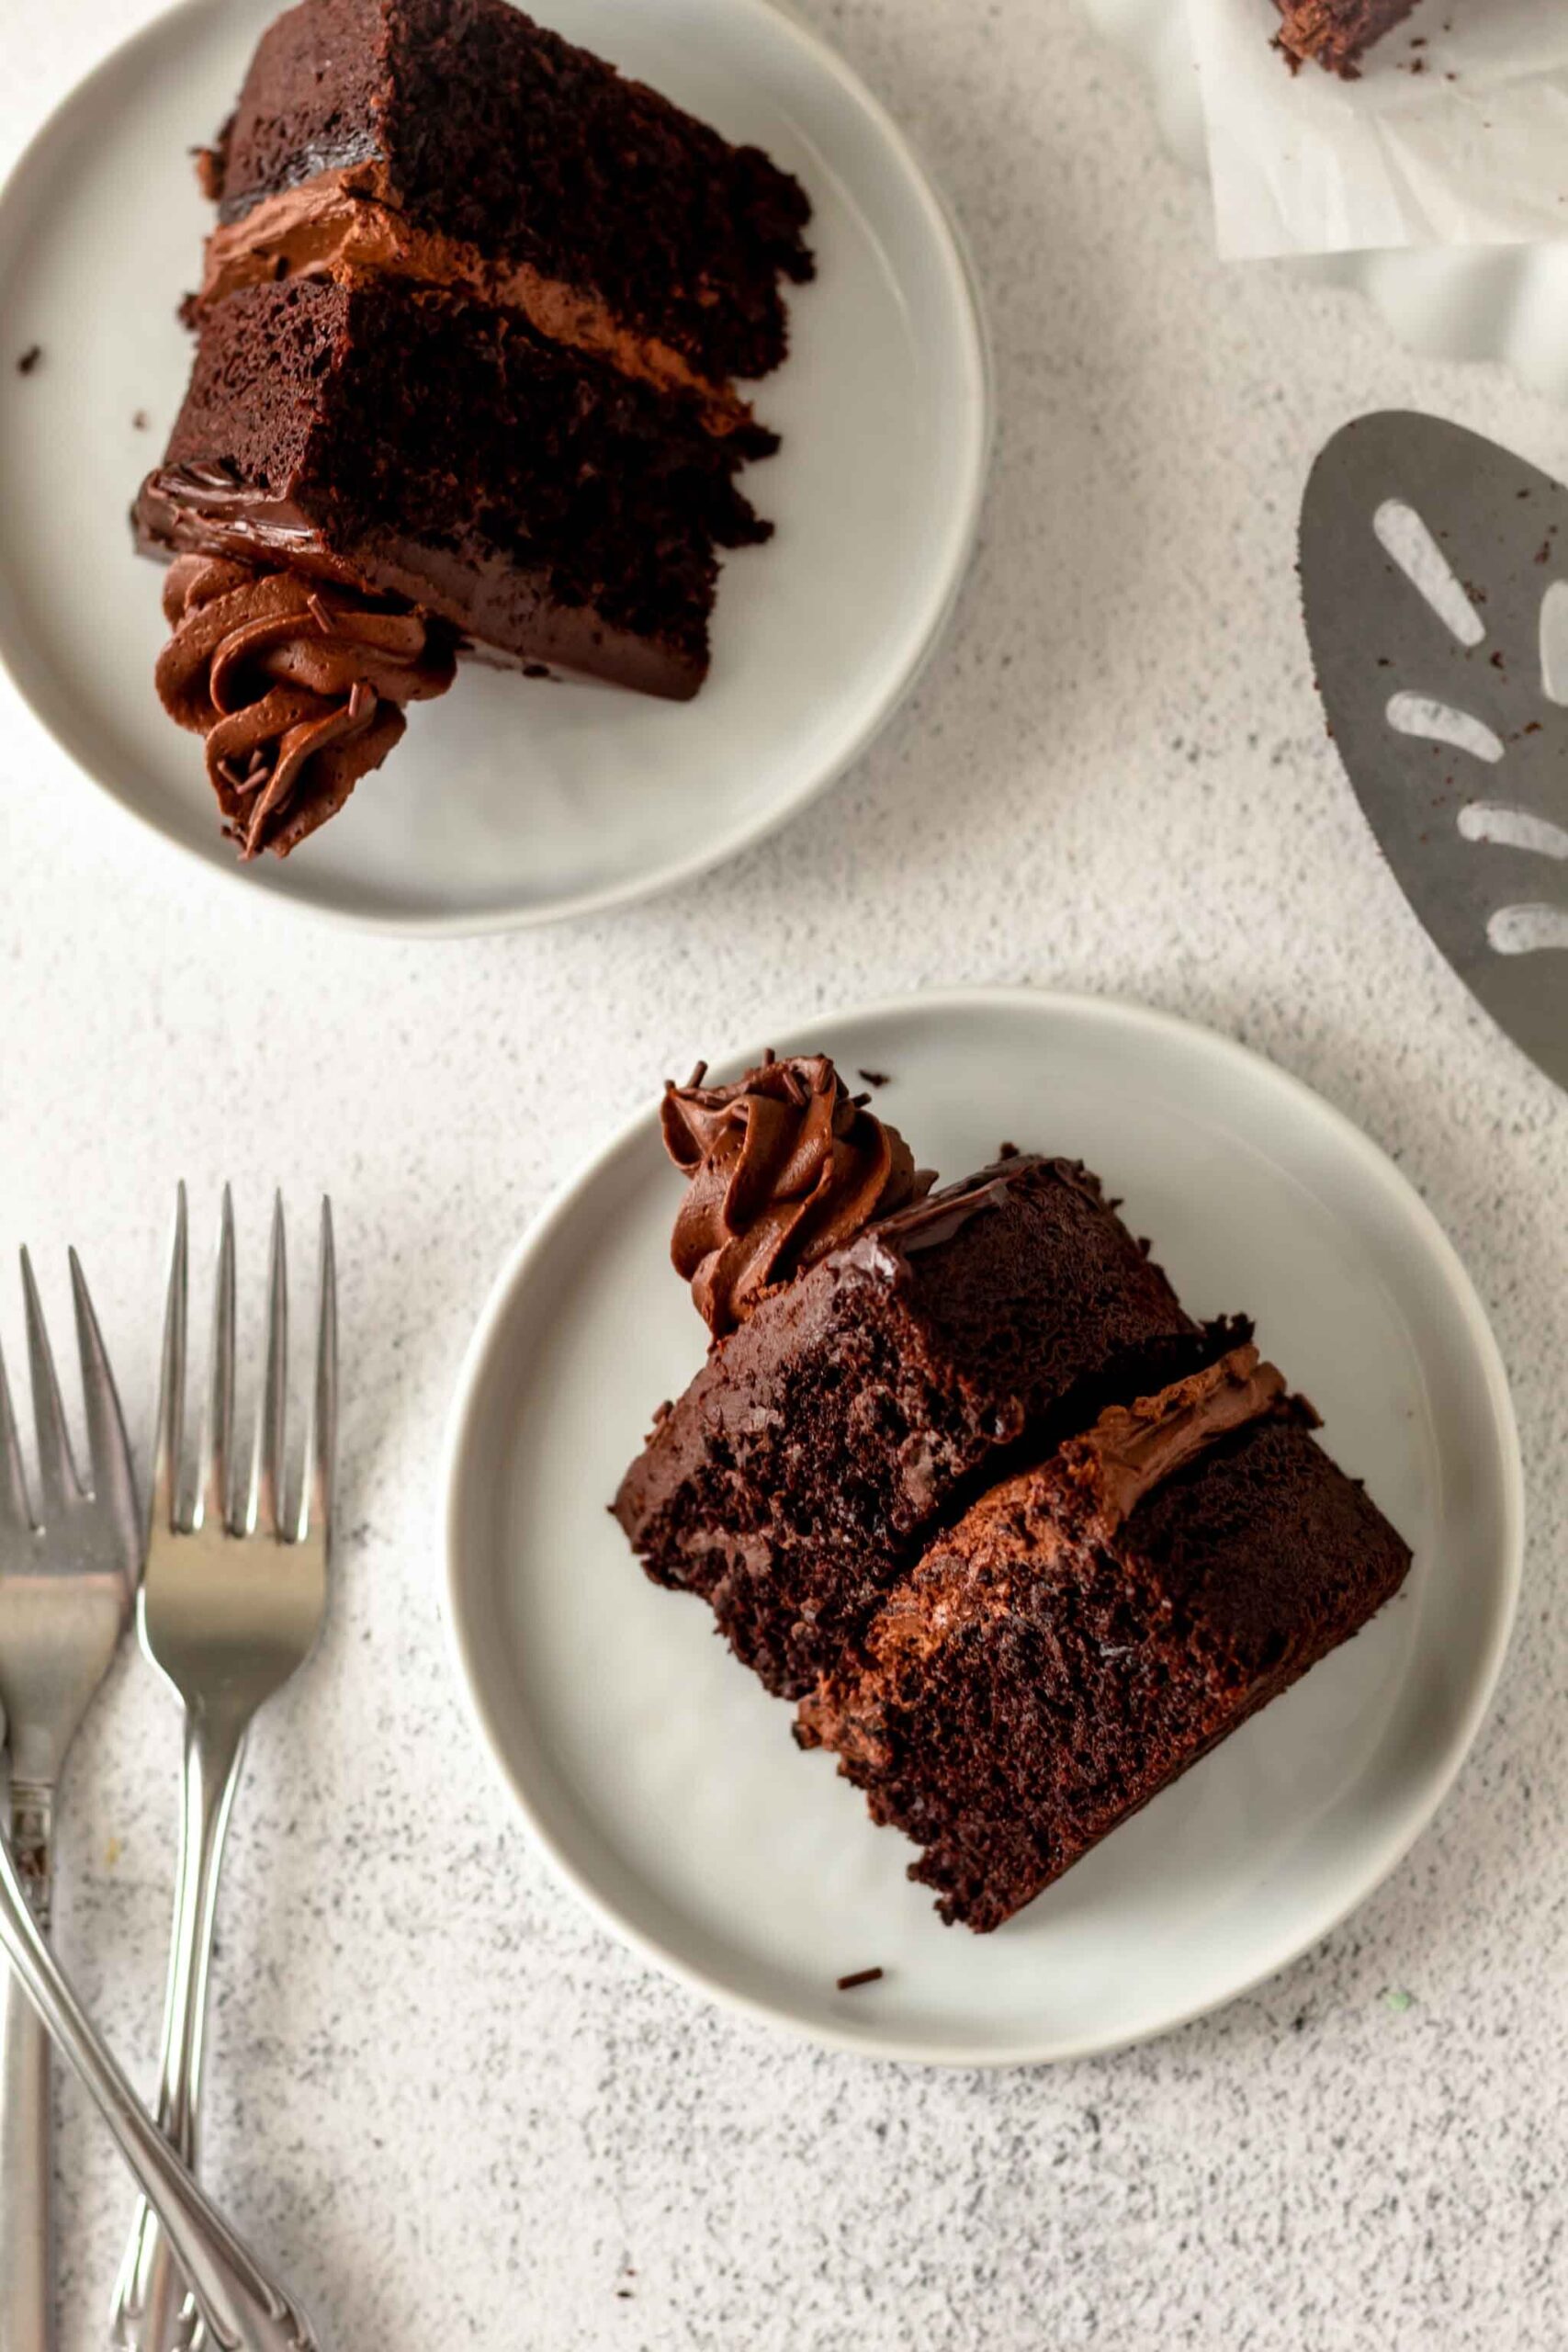 Slices of chocolate cake on small white plates with forks and a spatula nearby.